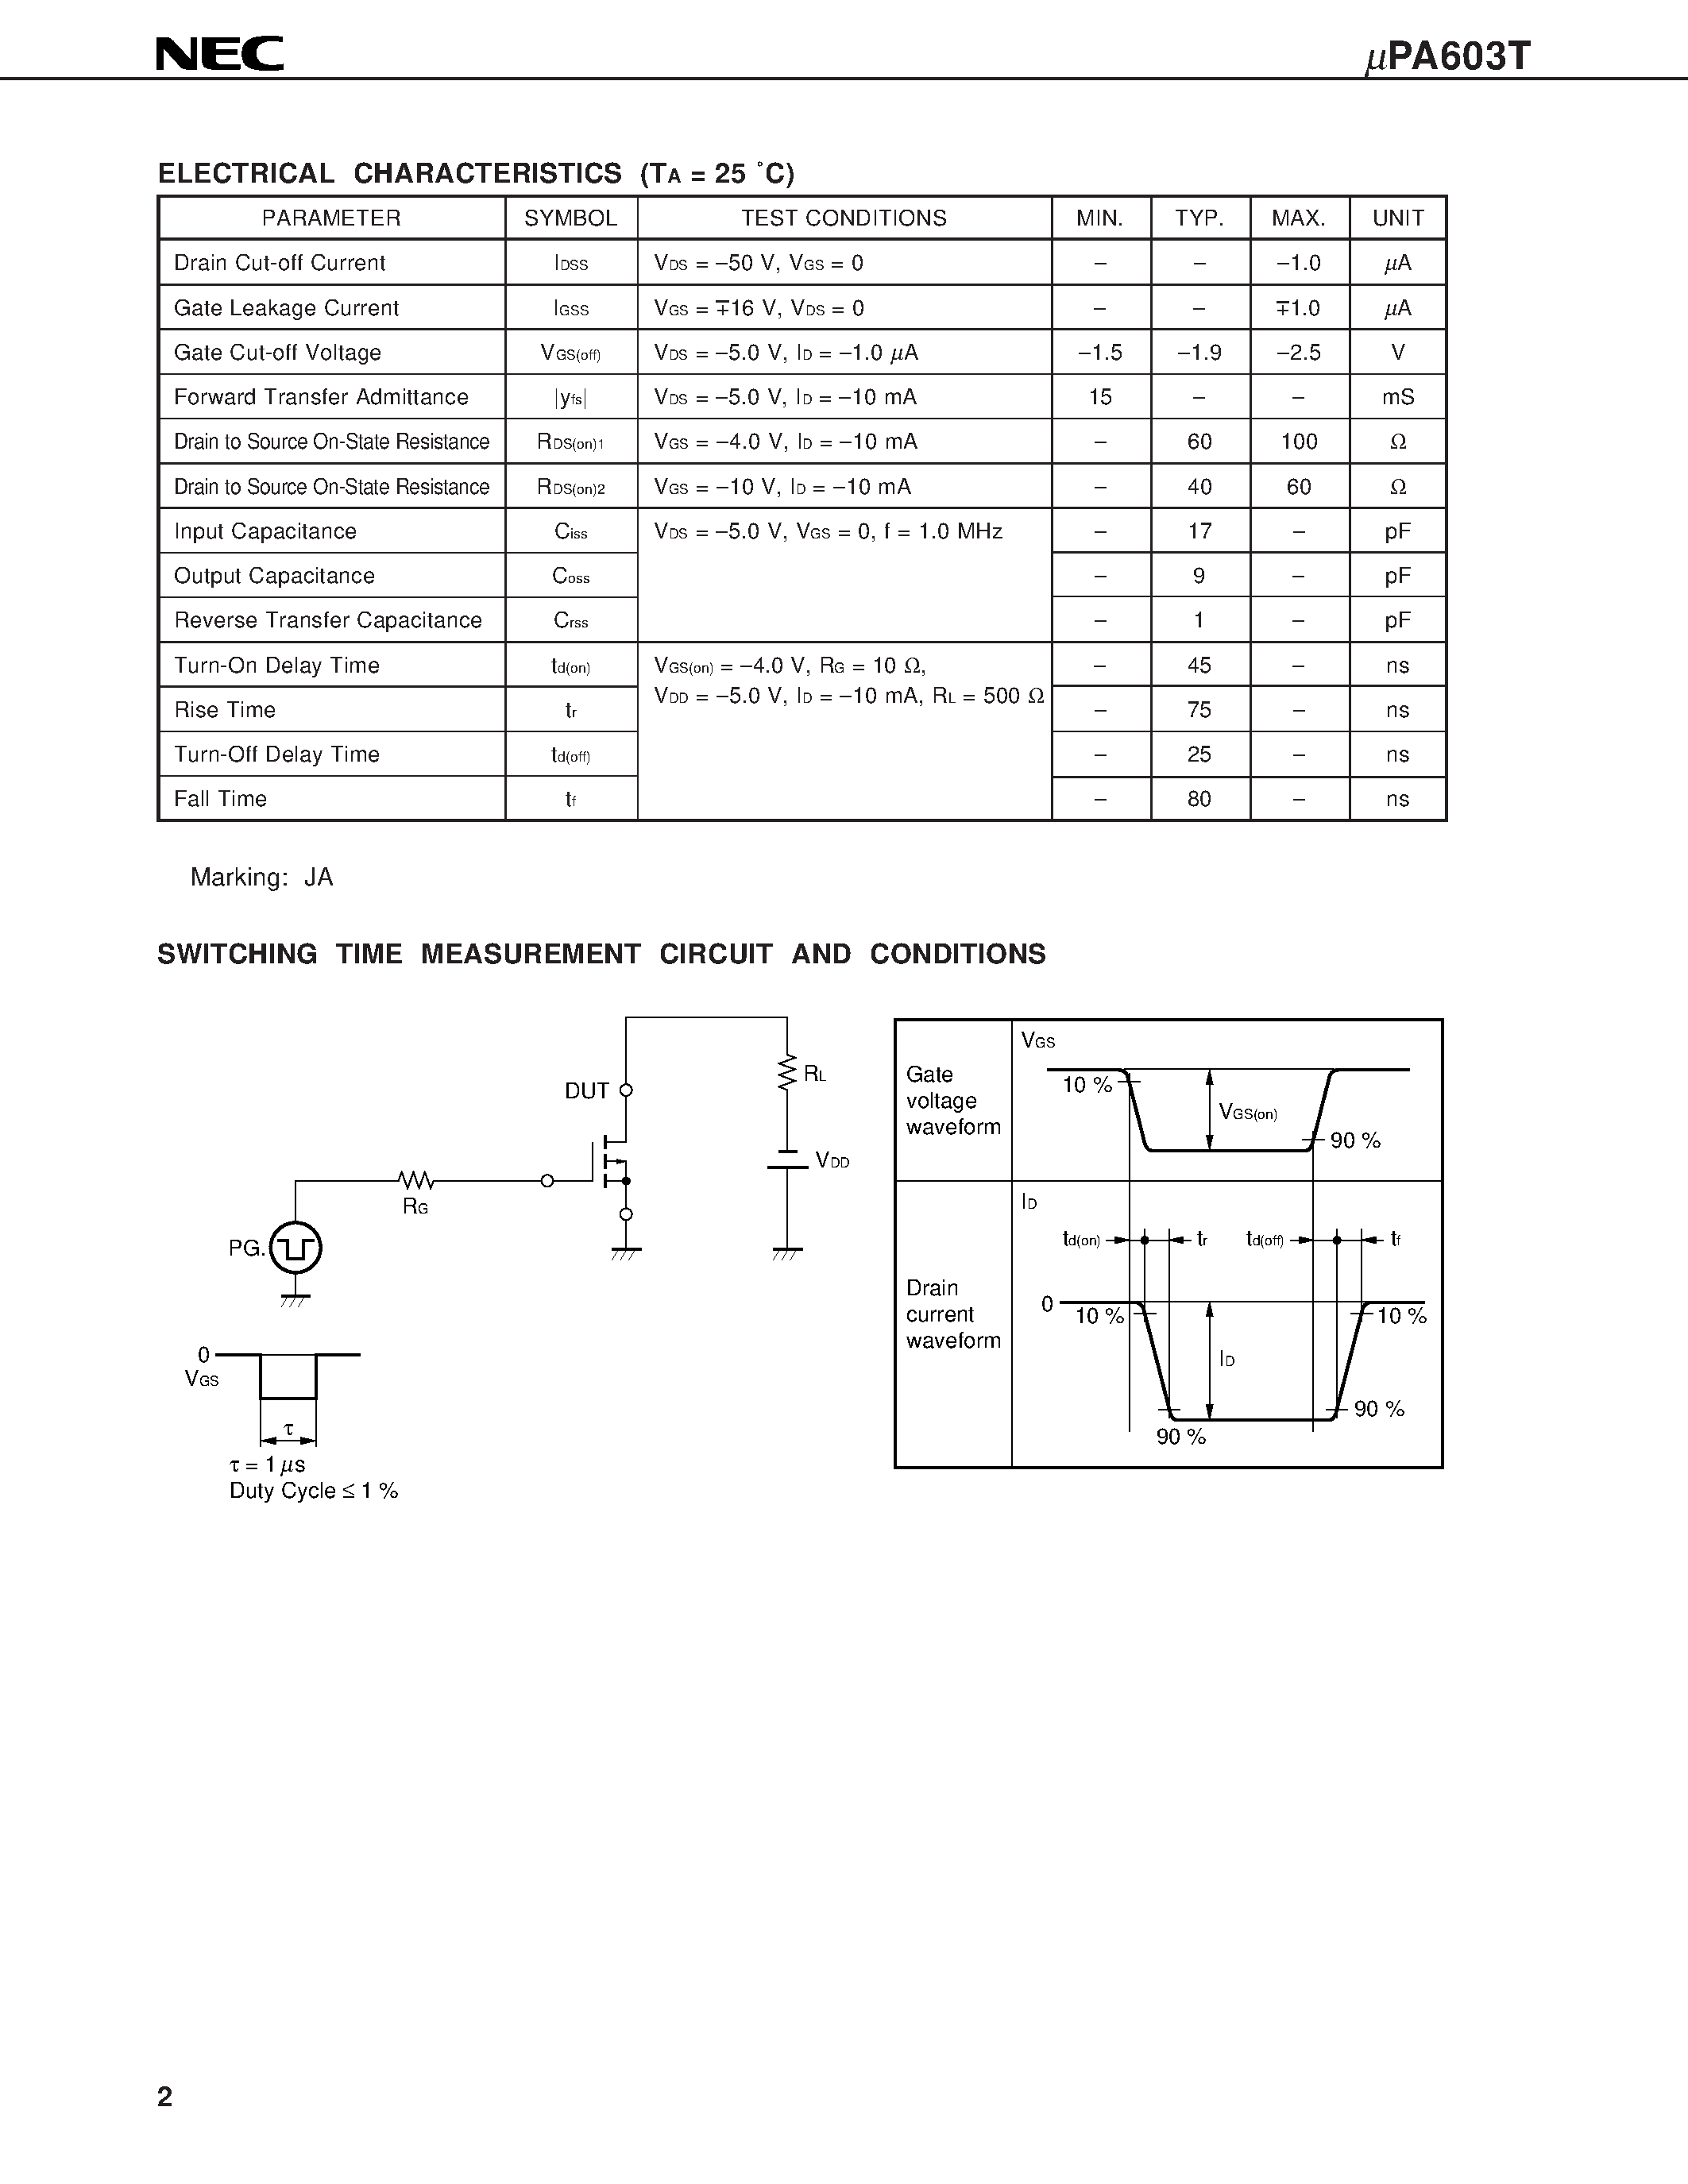 Datasheet UPA603T - P-CHANNEL MOS FET 6-PIN 2 CIRCUITS page 2